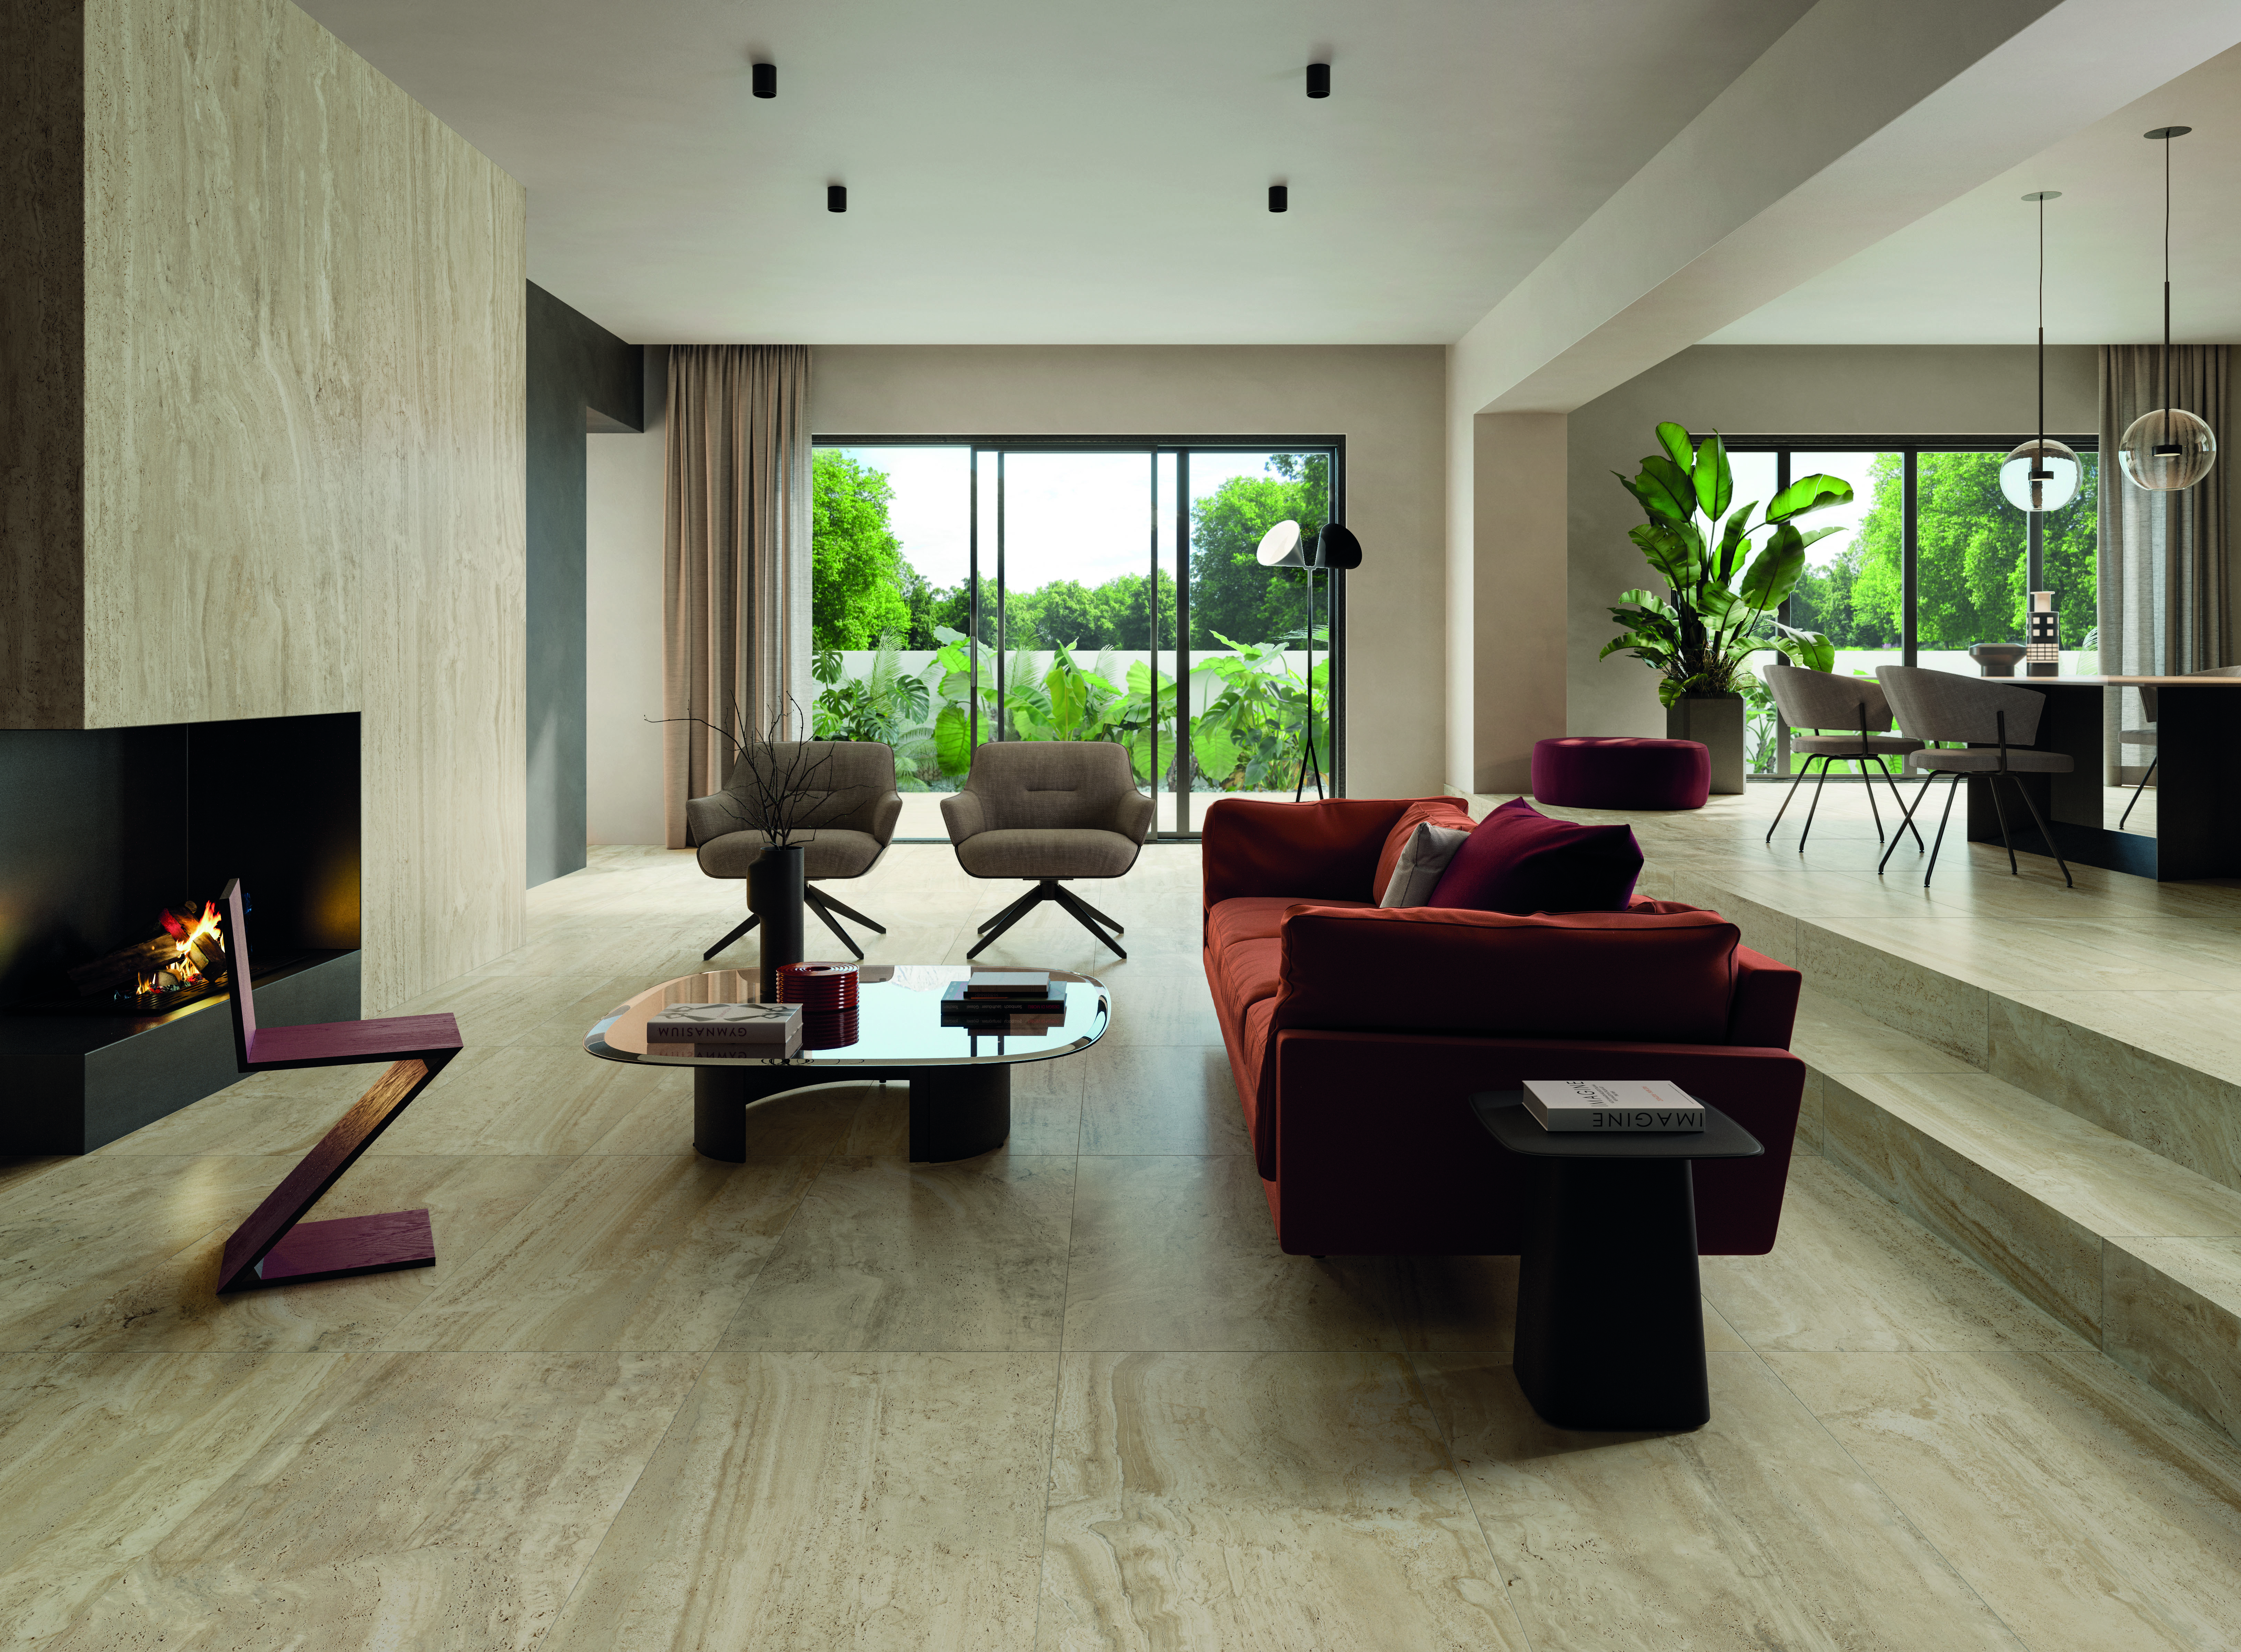 Rustic floor and wall wood-look tile in contemporary living room with sliding door view to garden and fireplace